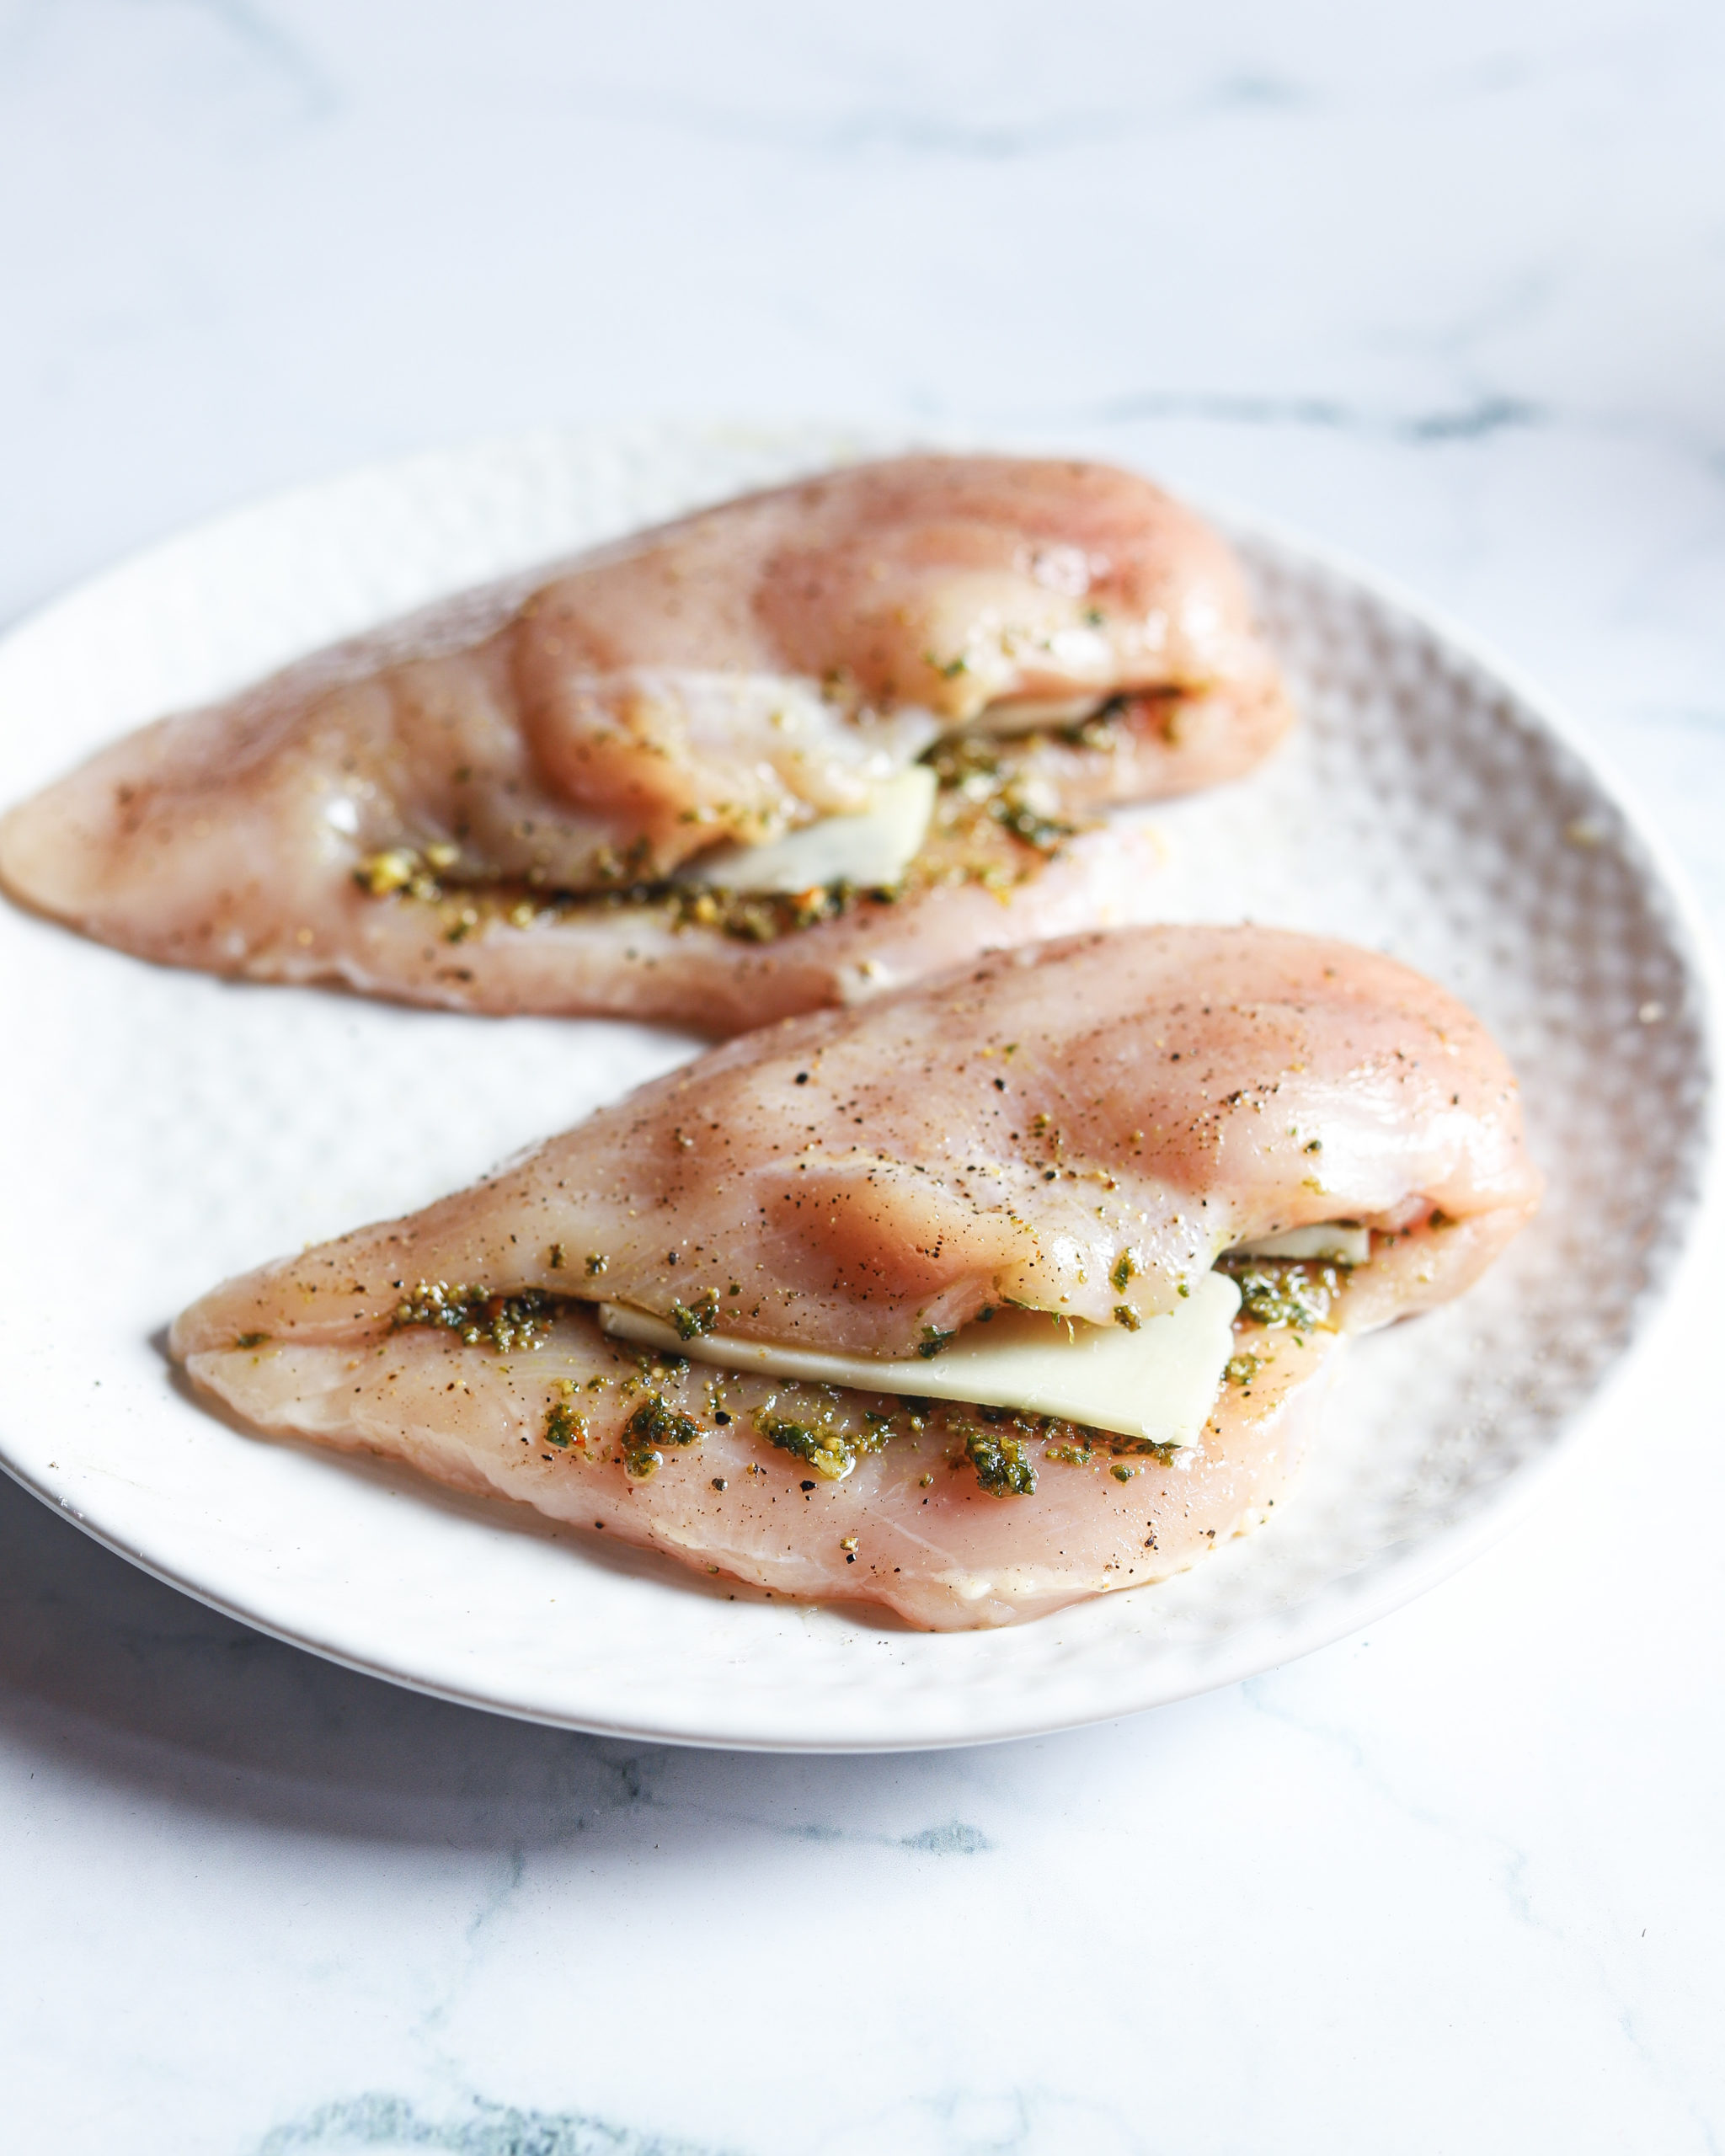 Raw chicken sliced with pesto and cheese inside on a white plate.